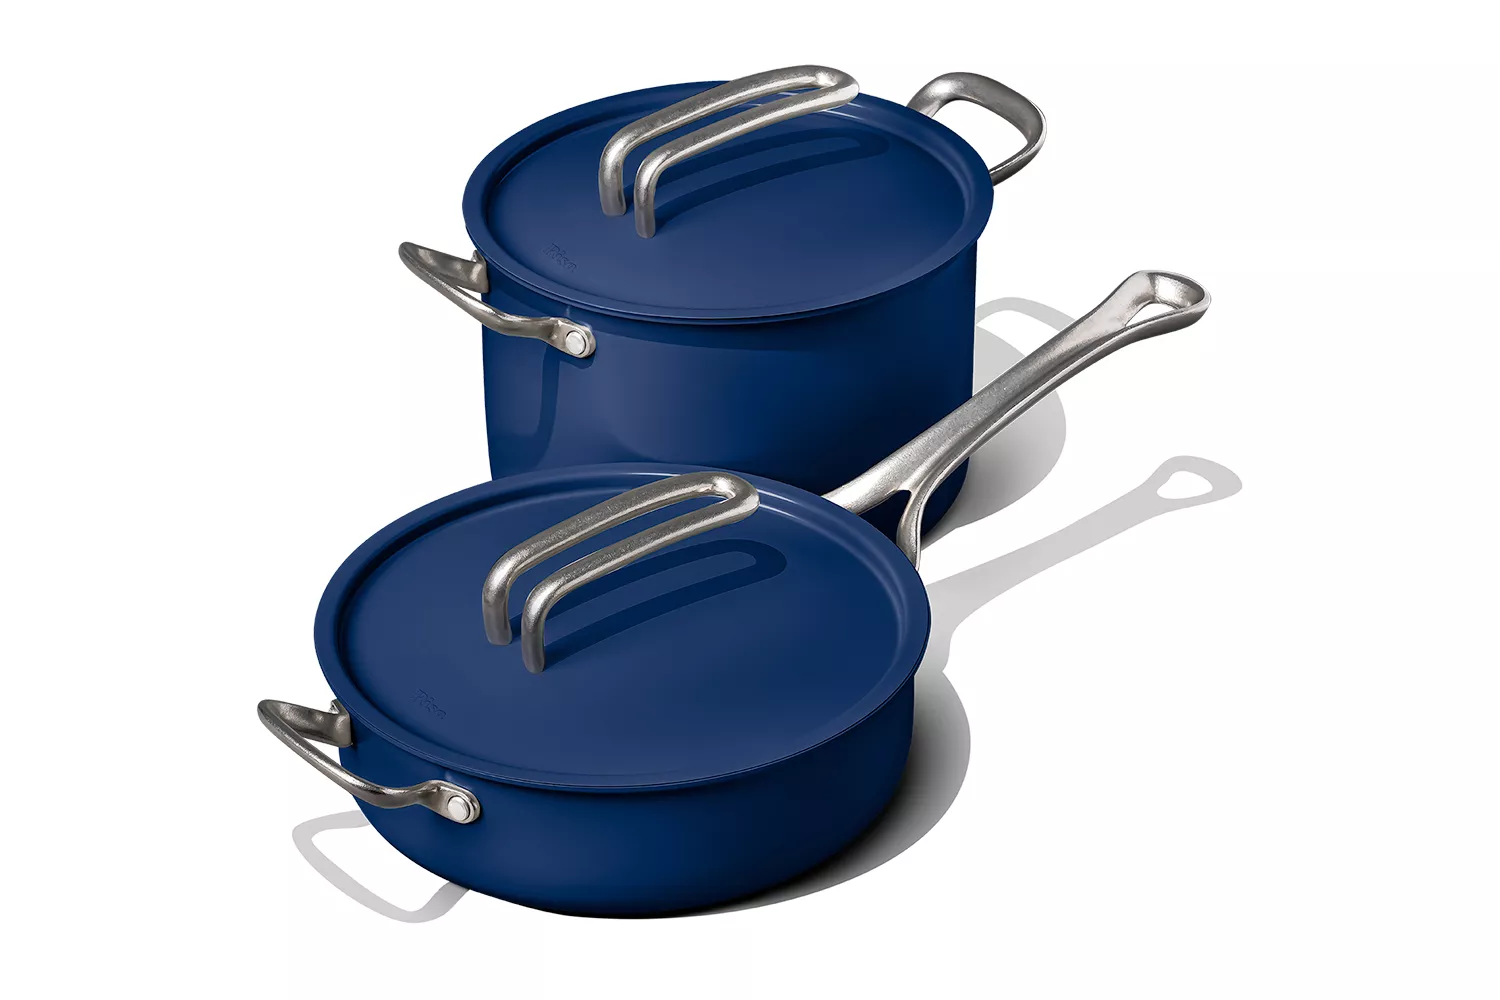 Risa The Cookware Set